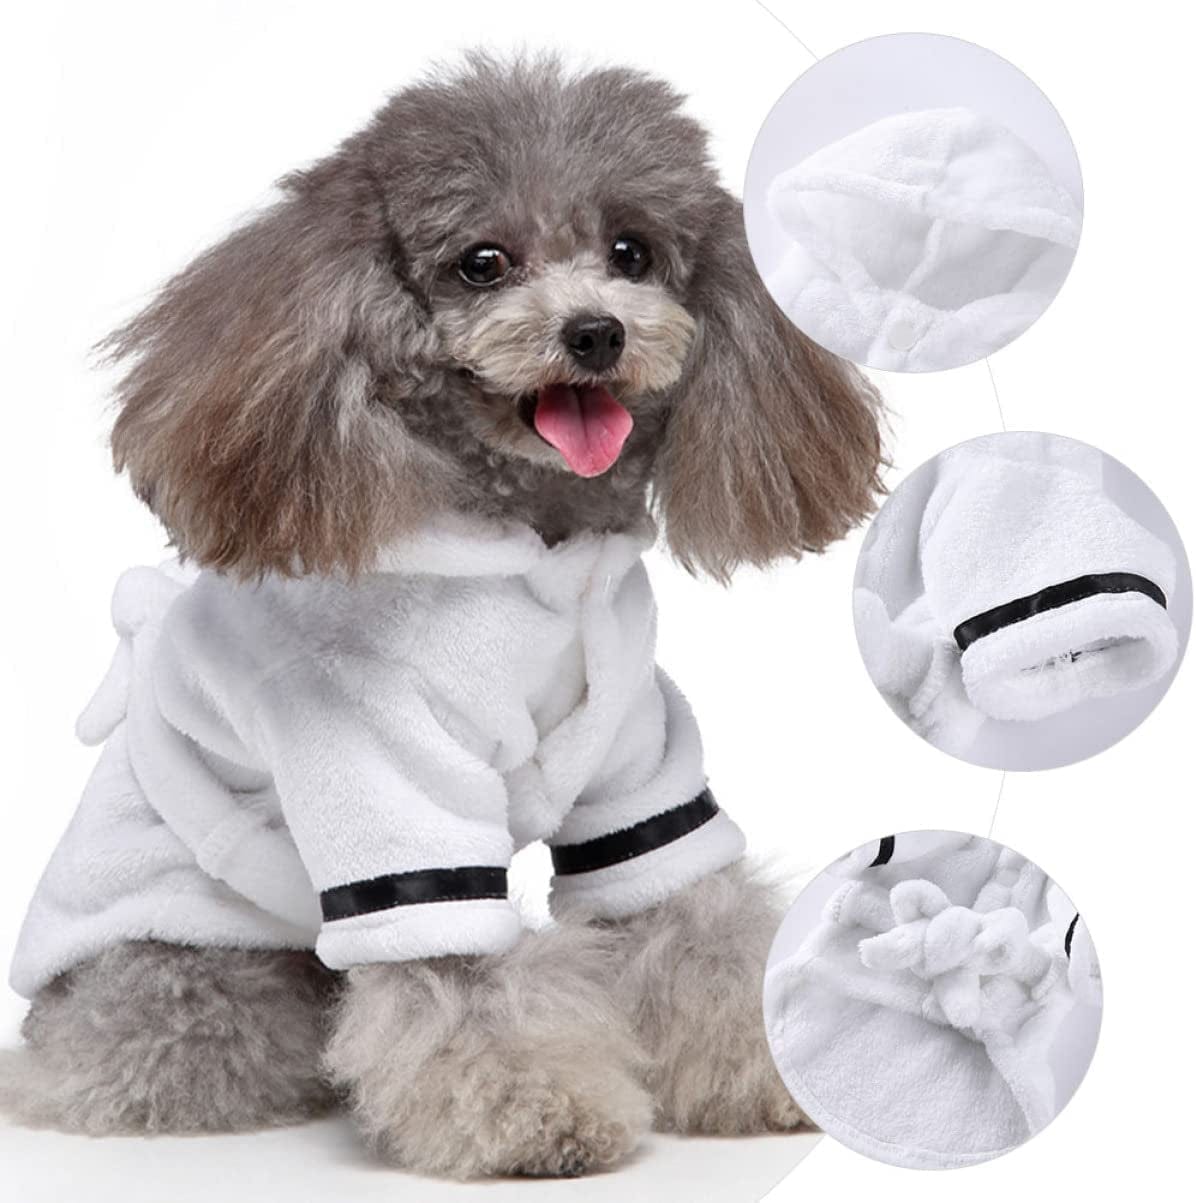 Balacoo 2Pcs Hood with Comfortable Supple Dog Pajama Quick Polyester Soft Belt Bathrobe Towel Robe Gown Fast for L Dogs Drying Robes Super Waist Cat Small Pet Bath Cats after Pajamas